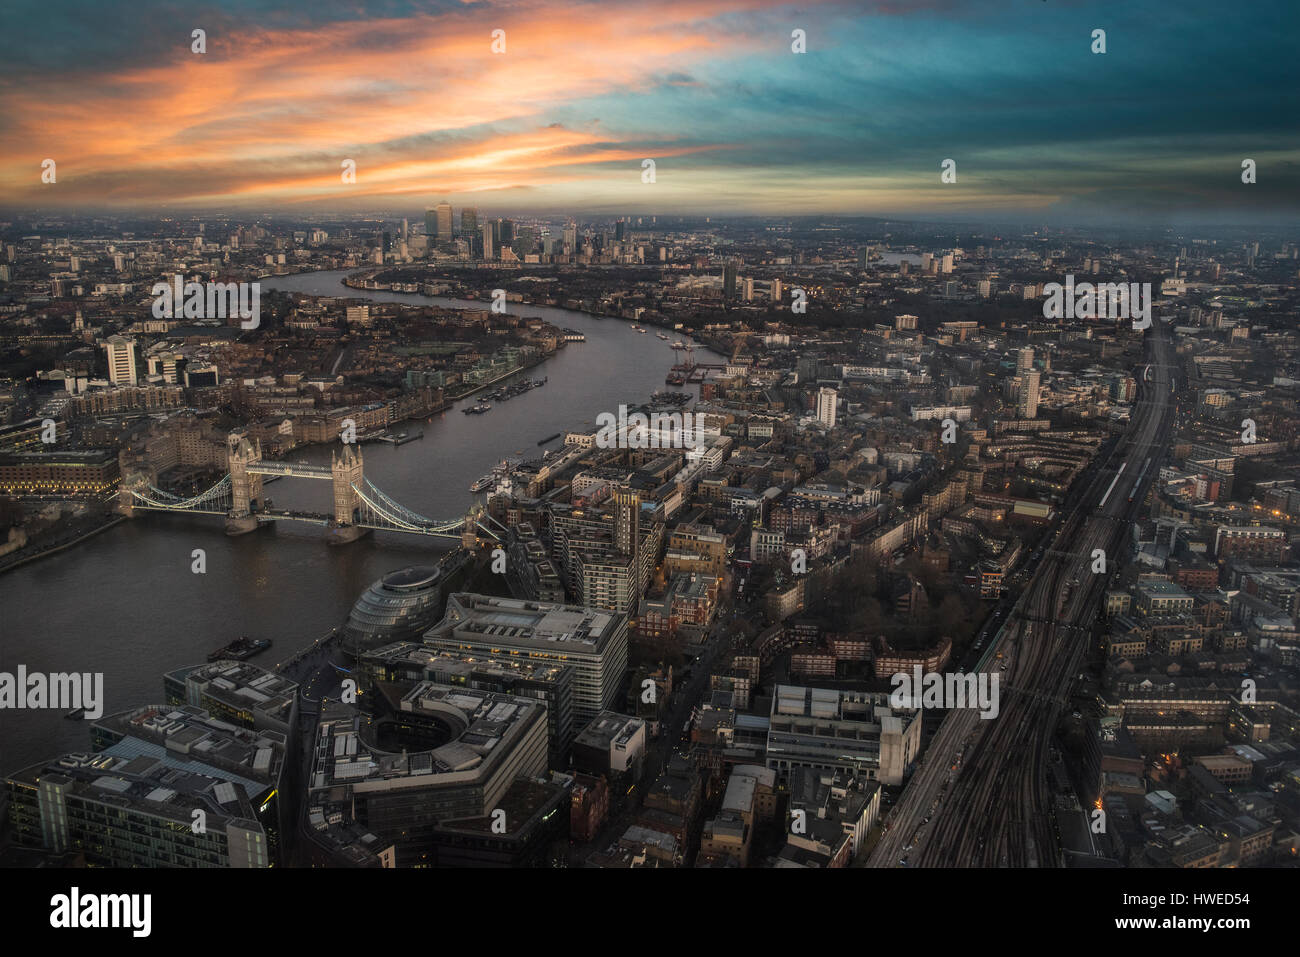 London aerial view at sunset Stock Photo - Alamy